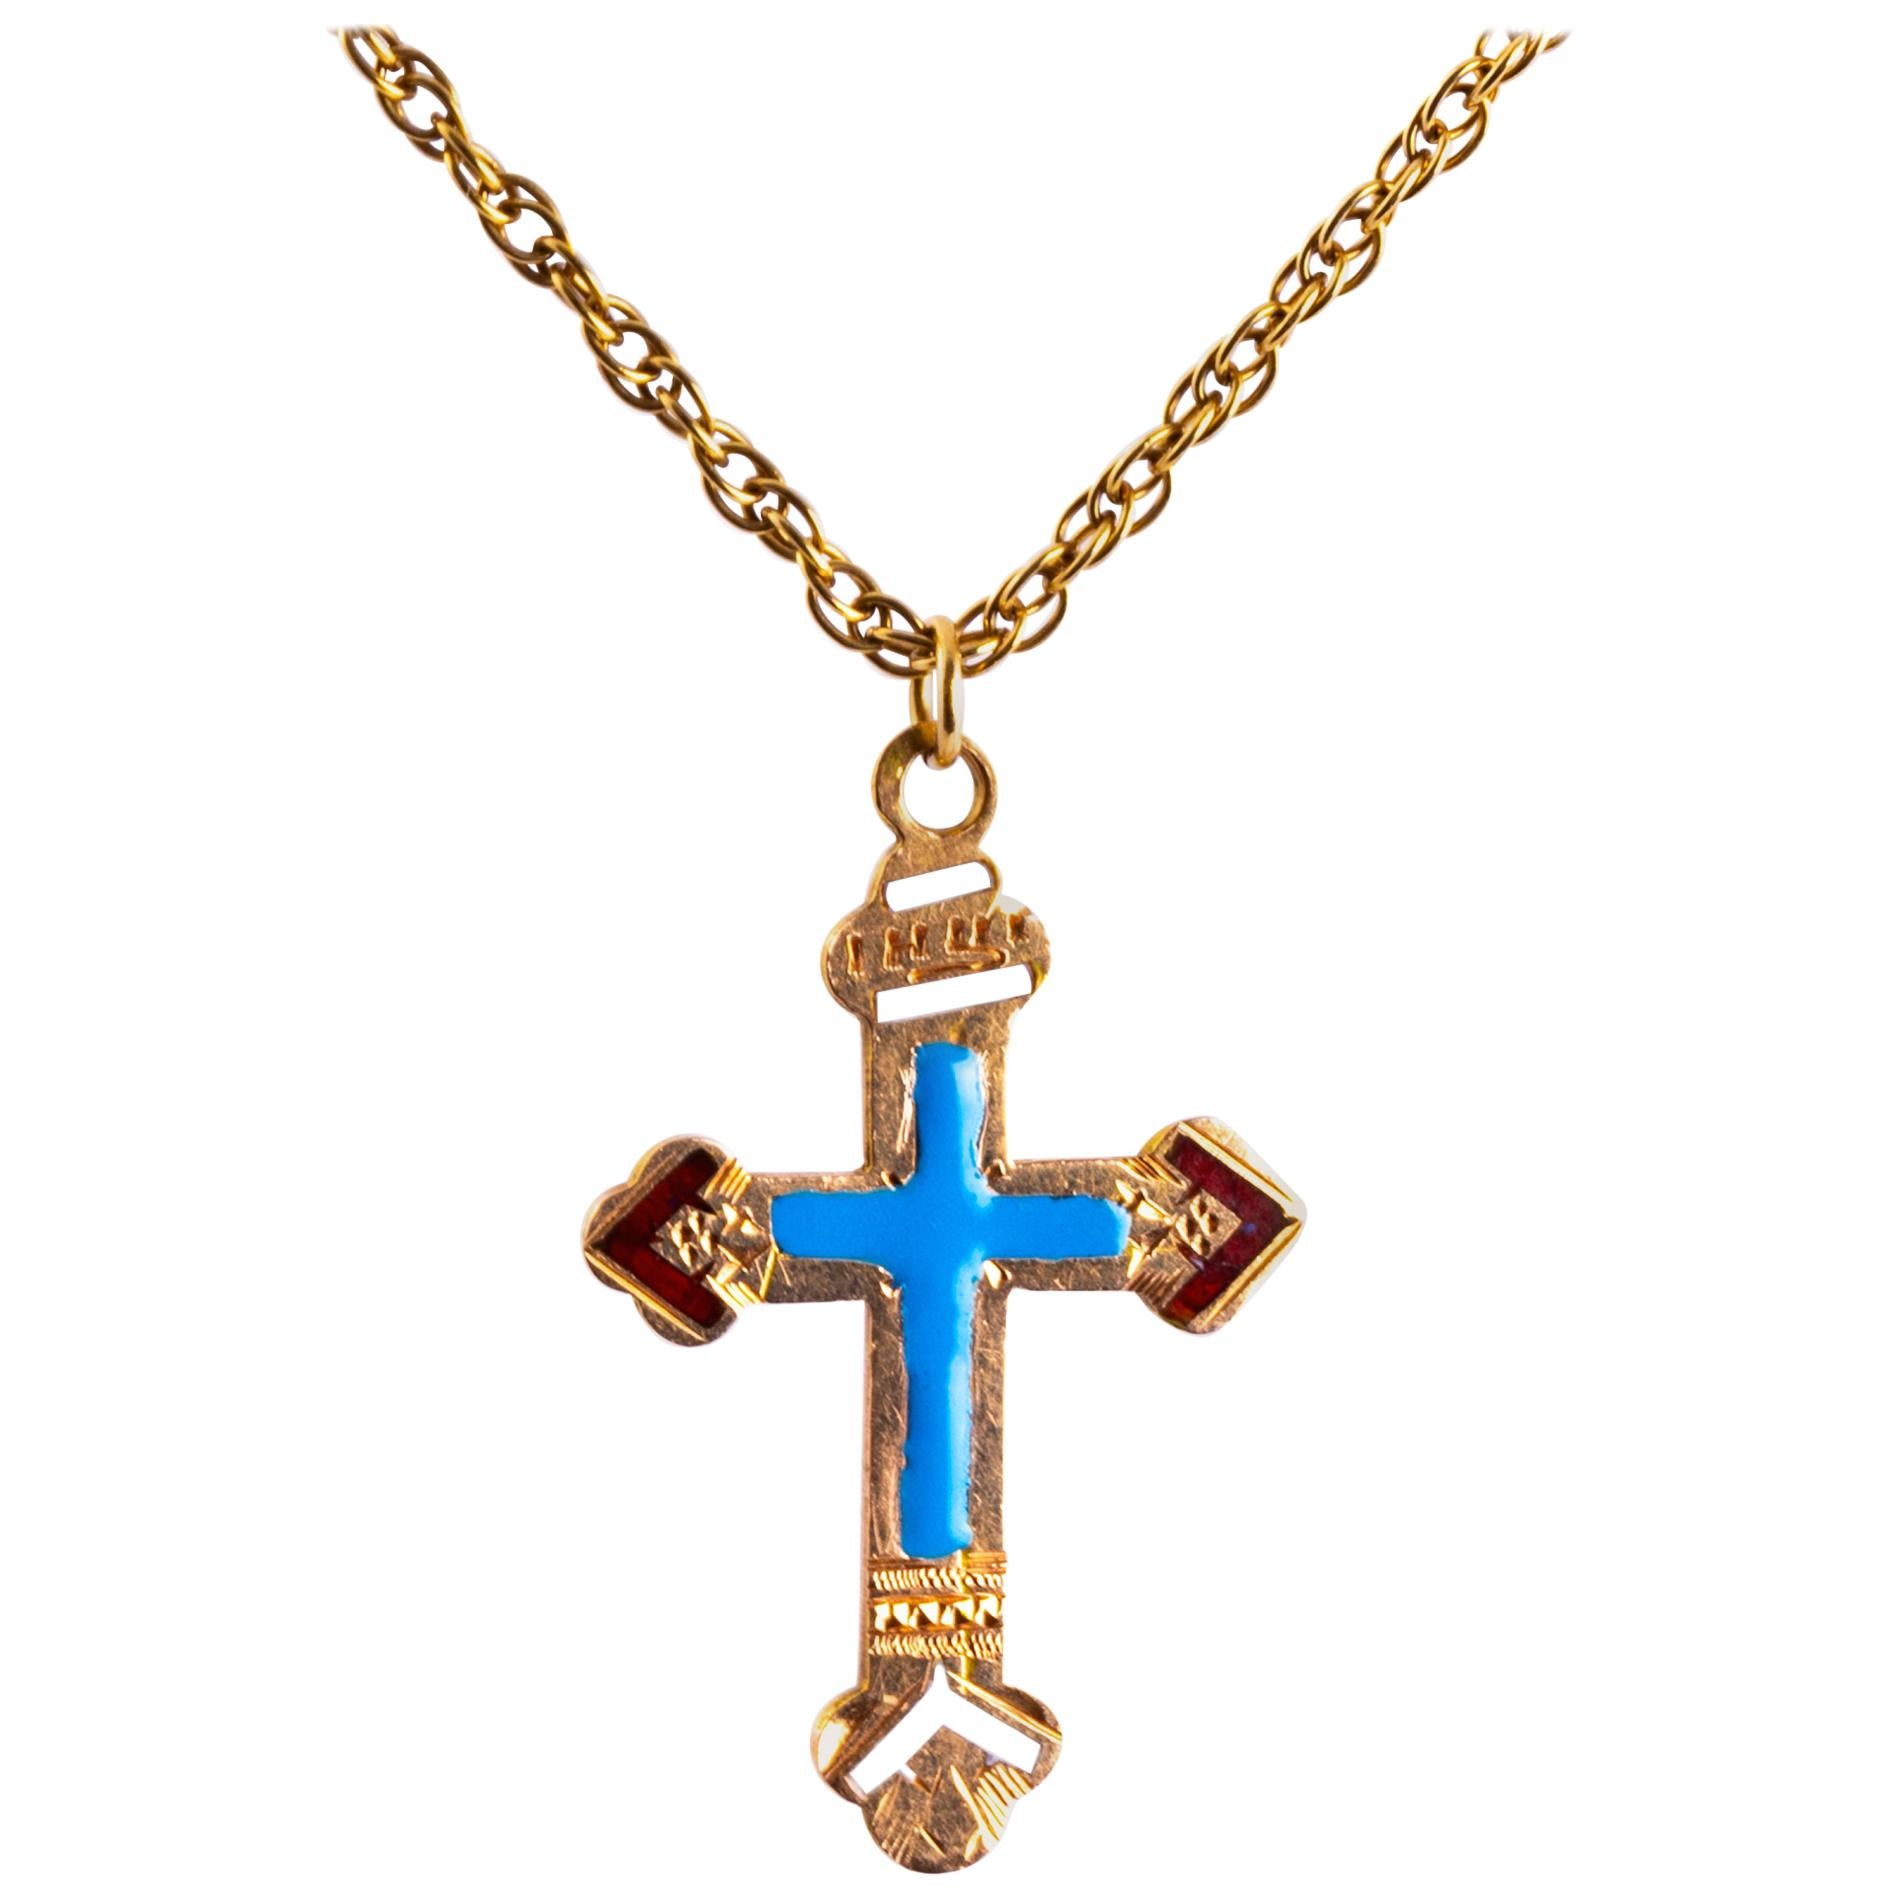 Antique Imperial Russian Gold and Enamel Cross Pendant Necklace